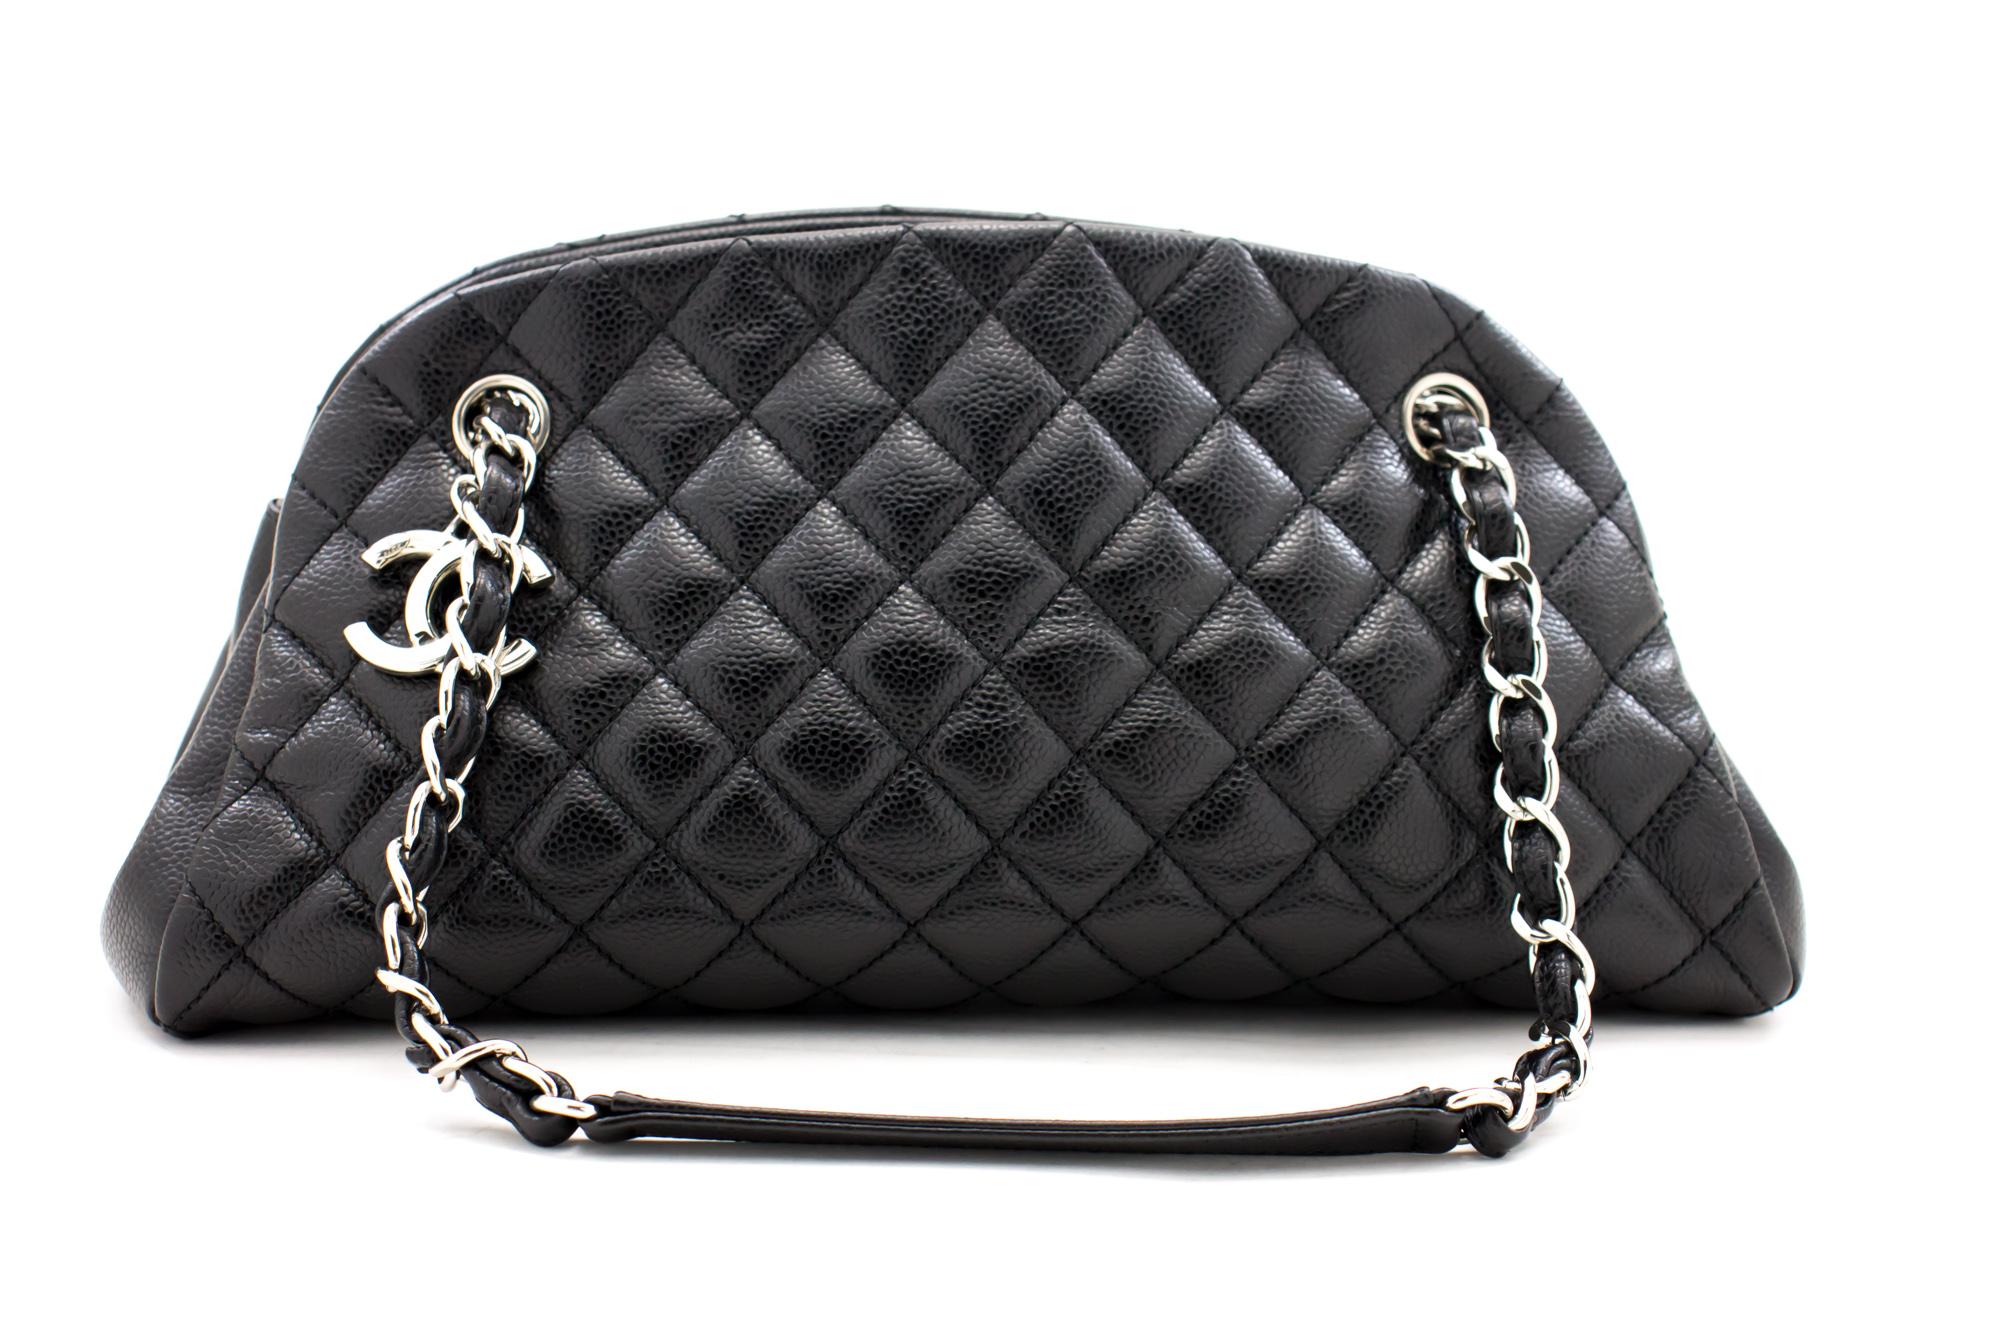 An authentic CHANEL Caviar Bowling Silver Chain Shoulder Bag Black Quilted. The color is Black. The outside material is Leather. The pattern is Solid. This item is Contemporary. The year of manufacture would be 2012.
Conditions & Ratings
Outside